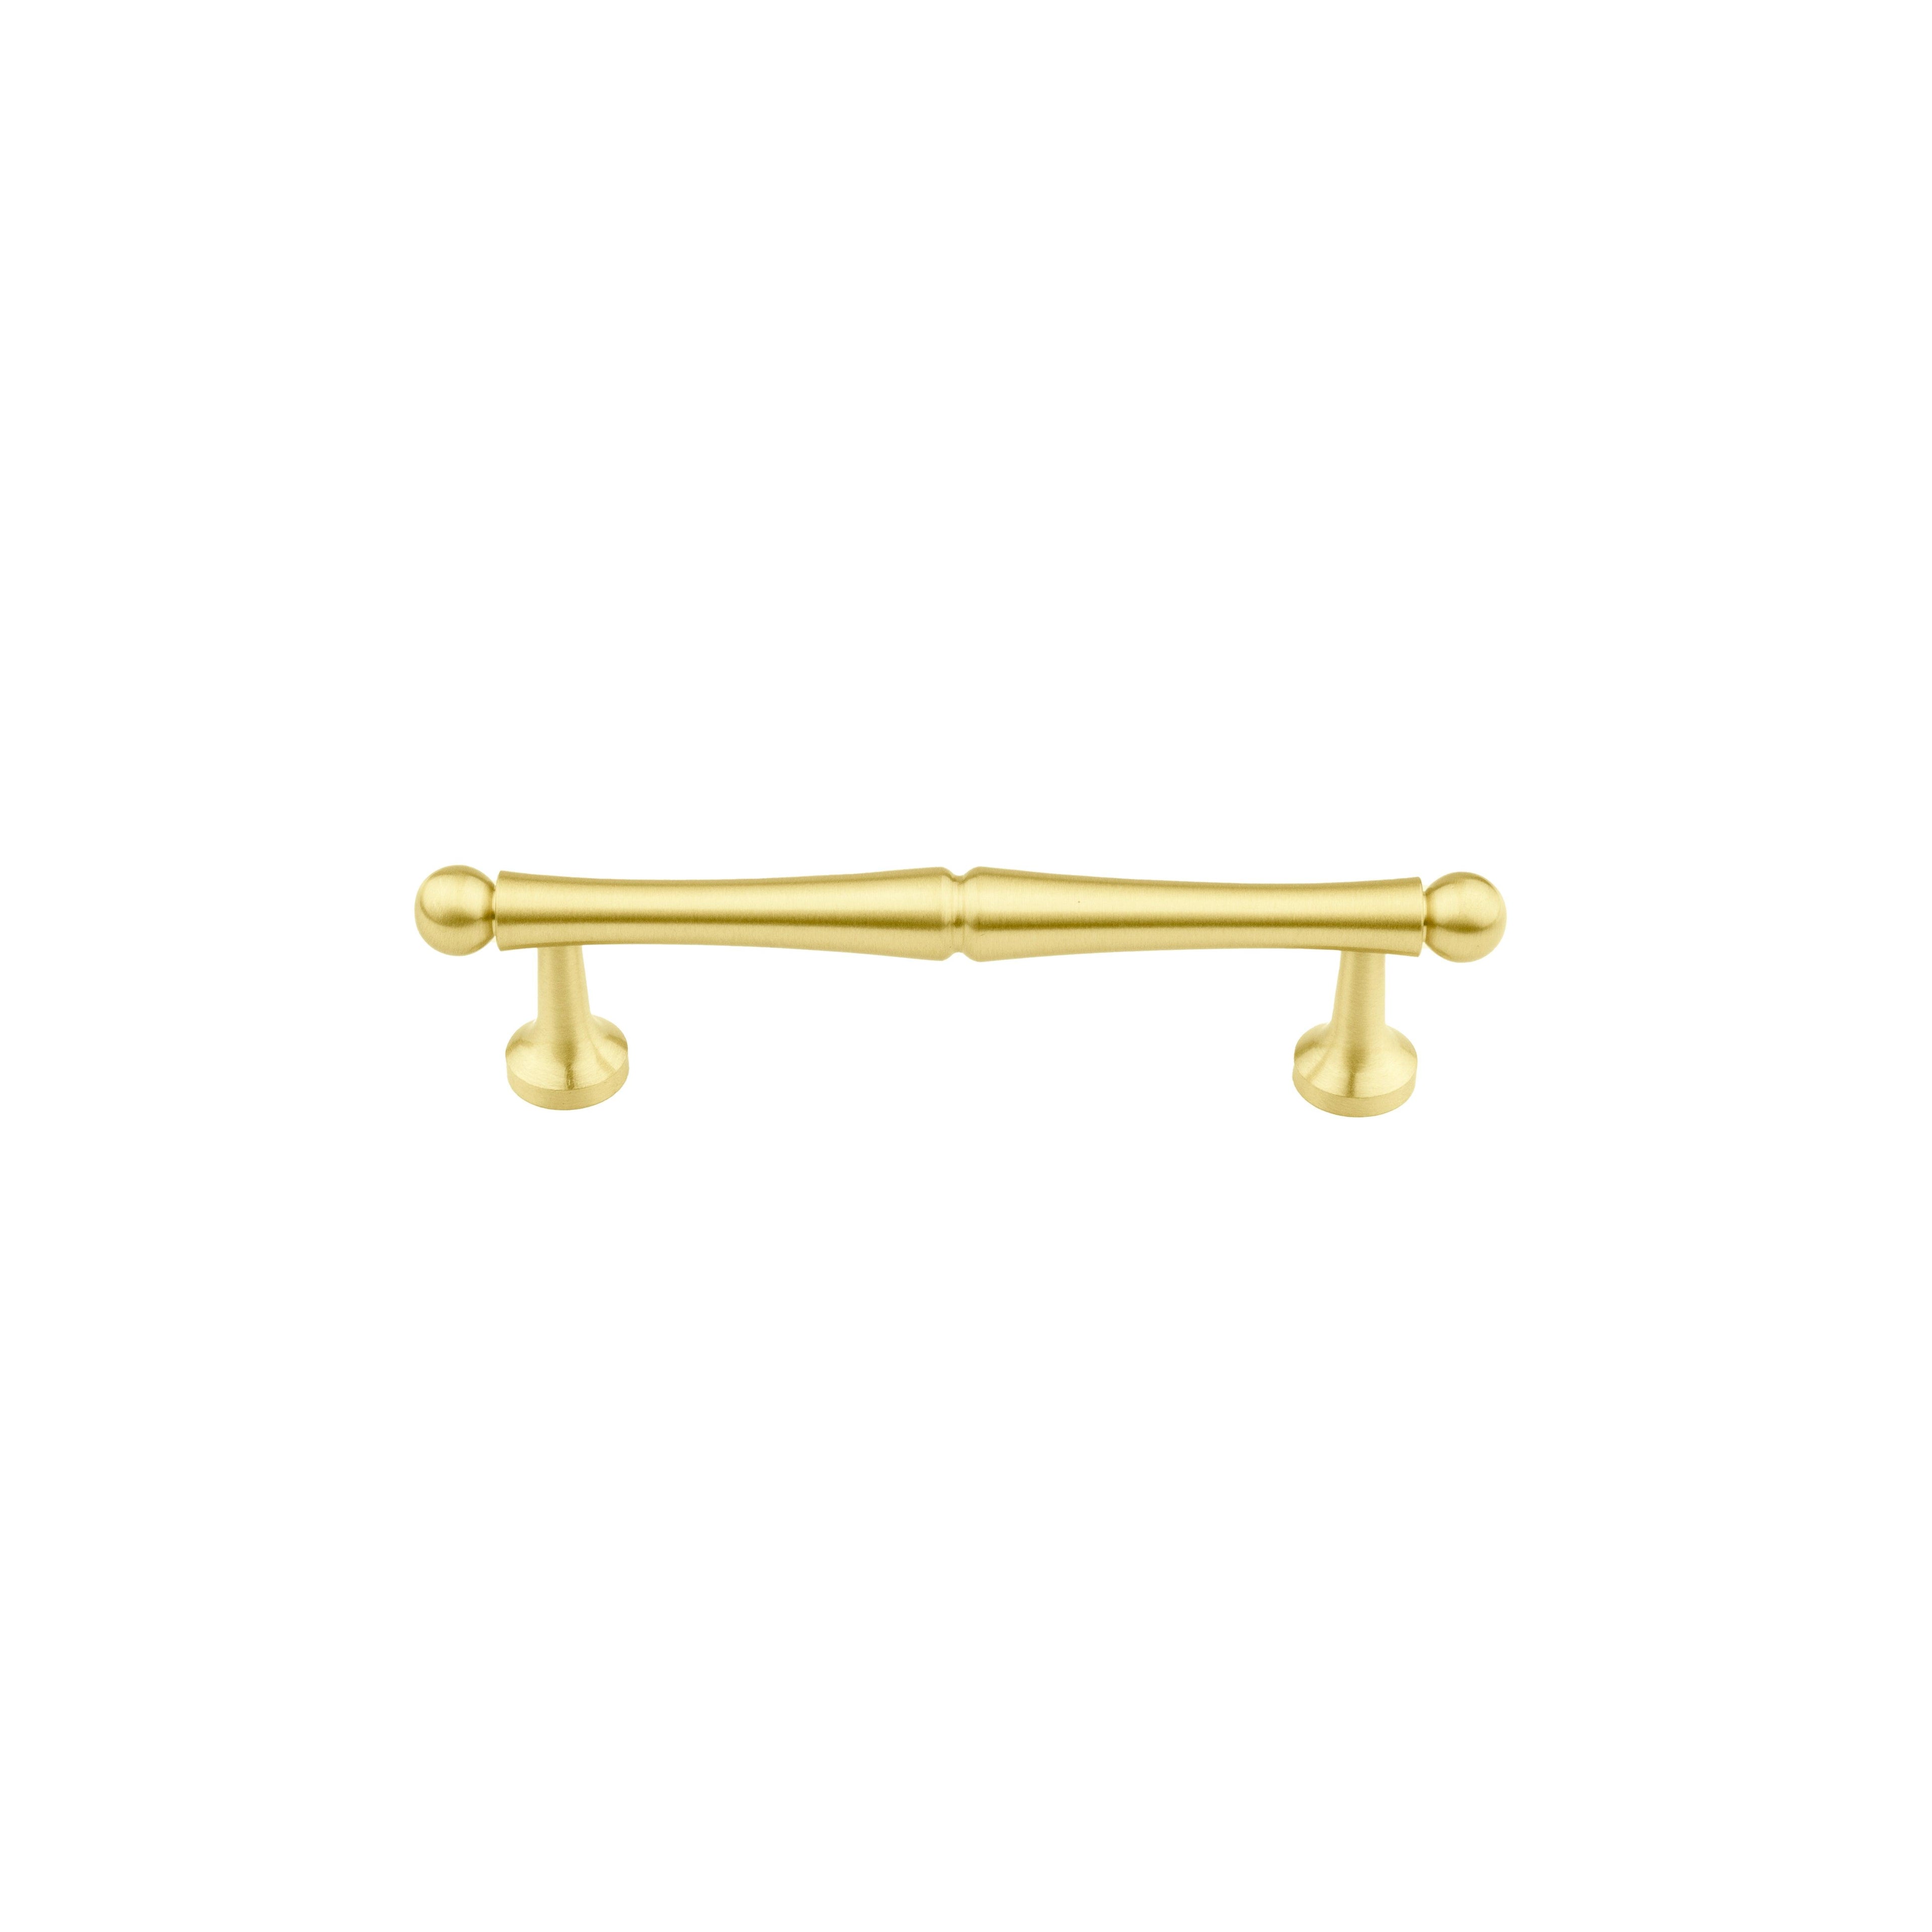 Giselle Handle Handles 125mm / Gold / Brass - M A N T A R A